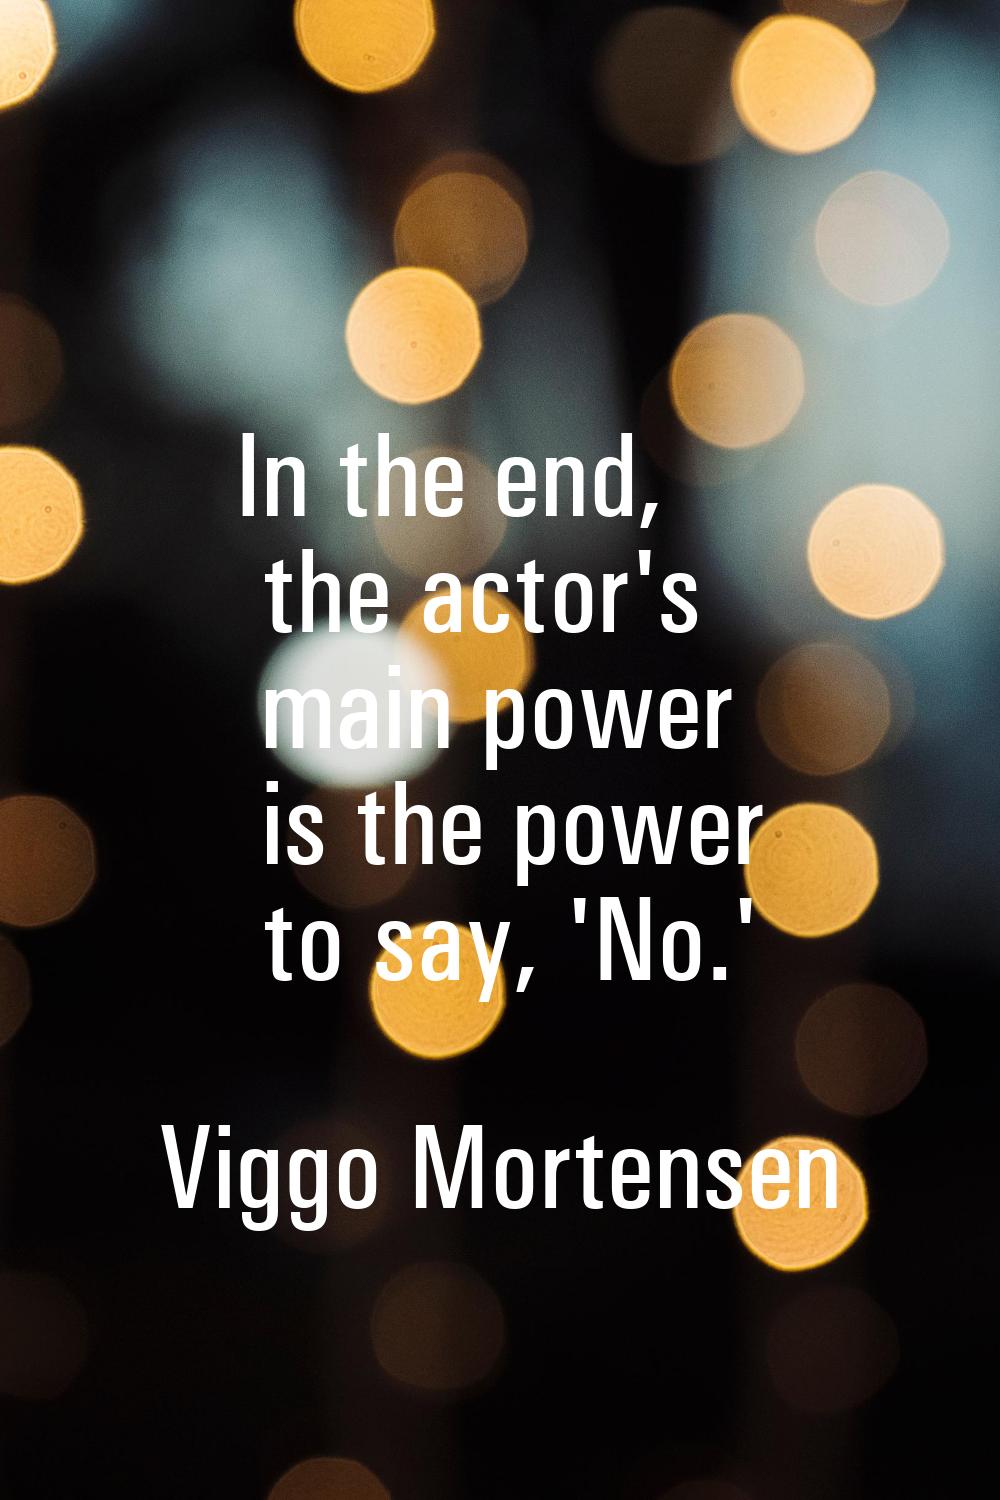 In the end, the actor's main power is the power to say, 'No.'